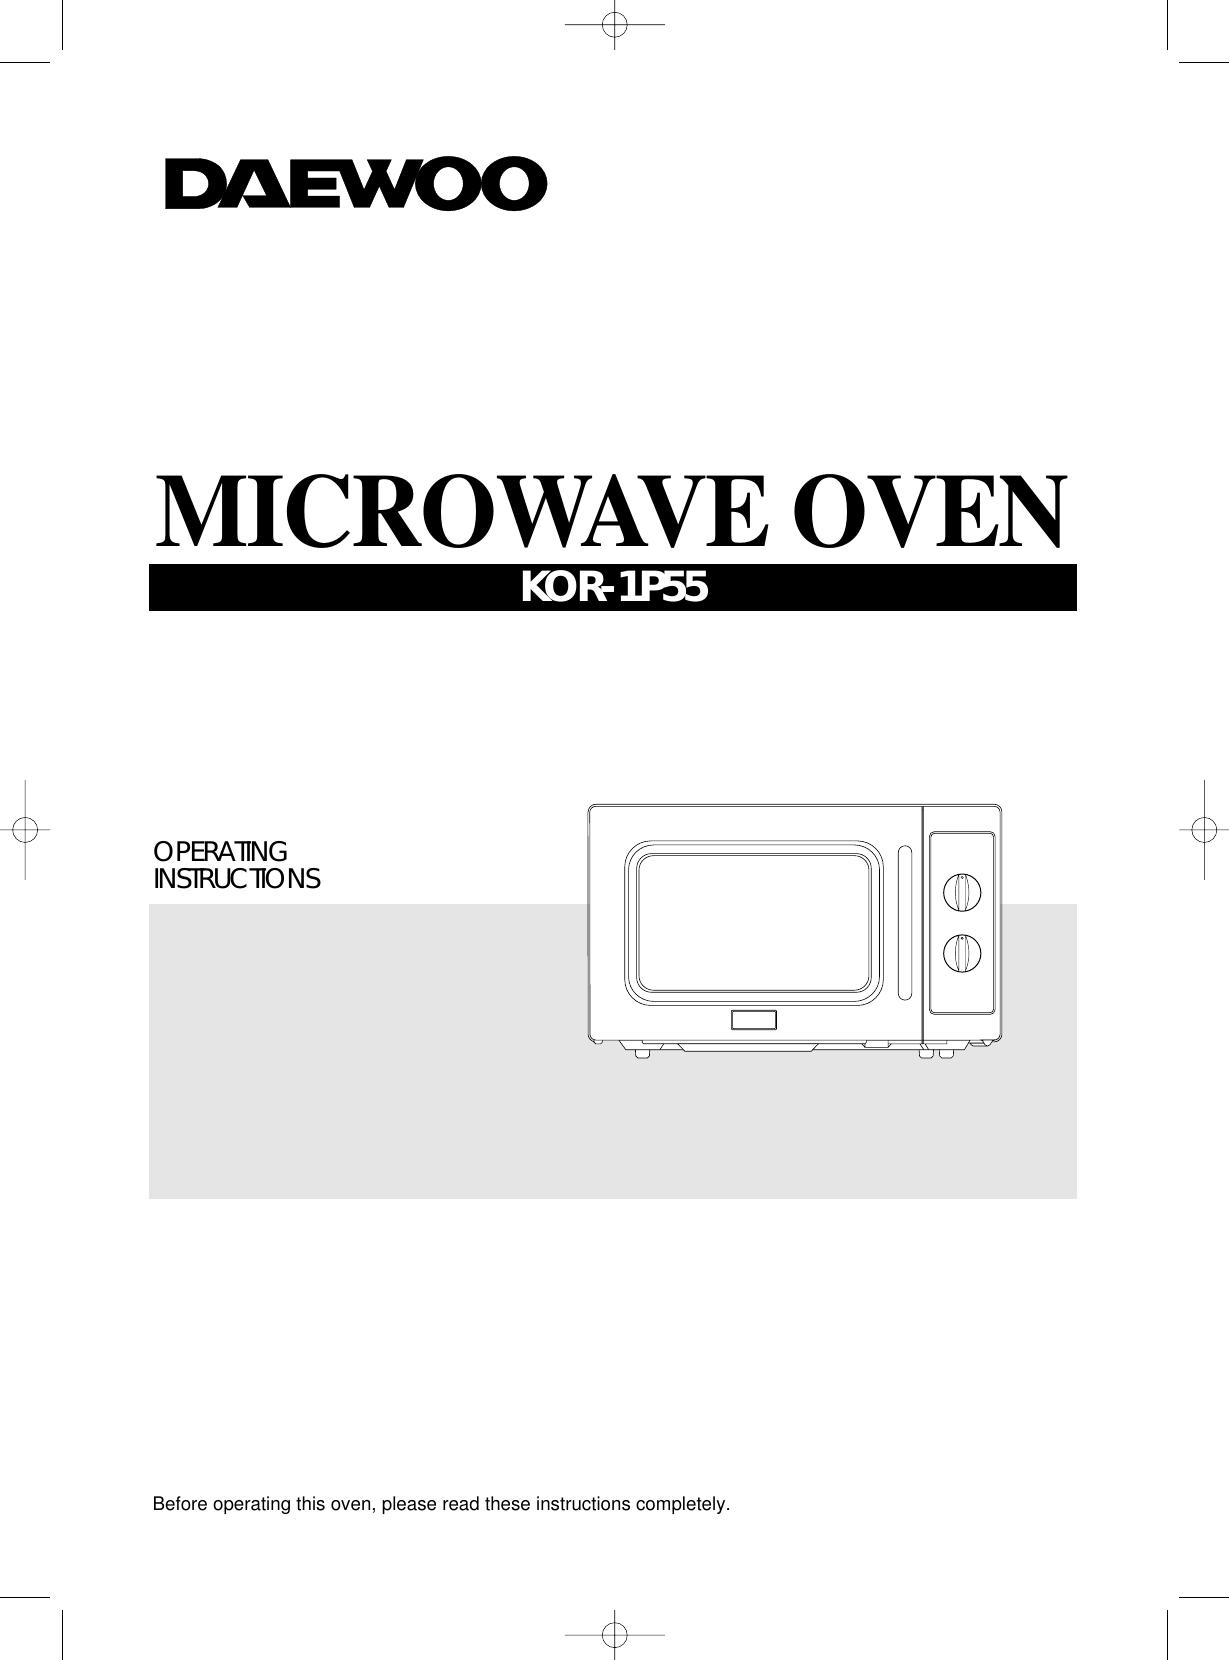 Before operating this oven, please read these instructions completely.OPERATINGINSTRUCTIONSMICROWAVE OVENKOR-1P55